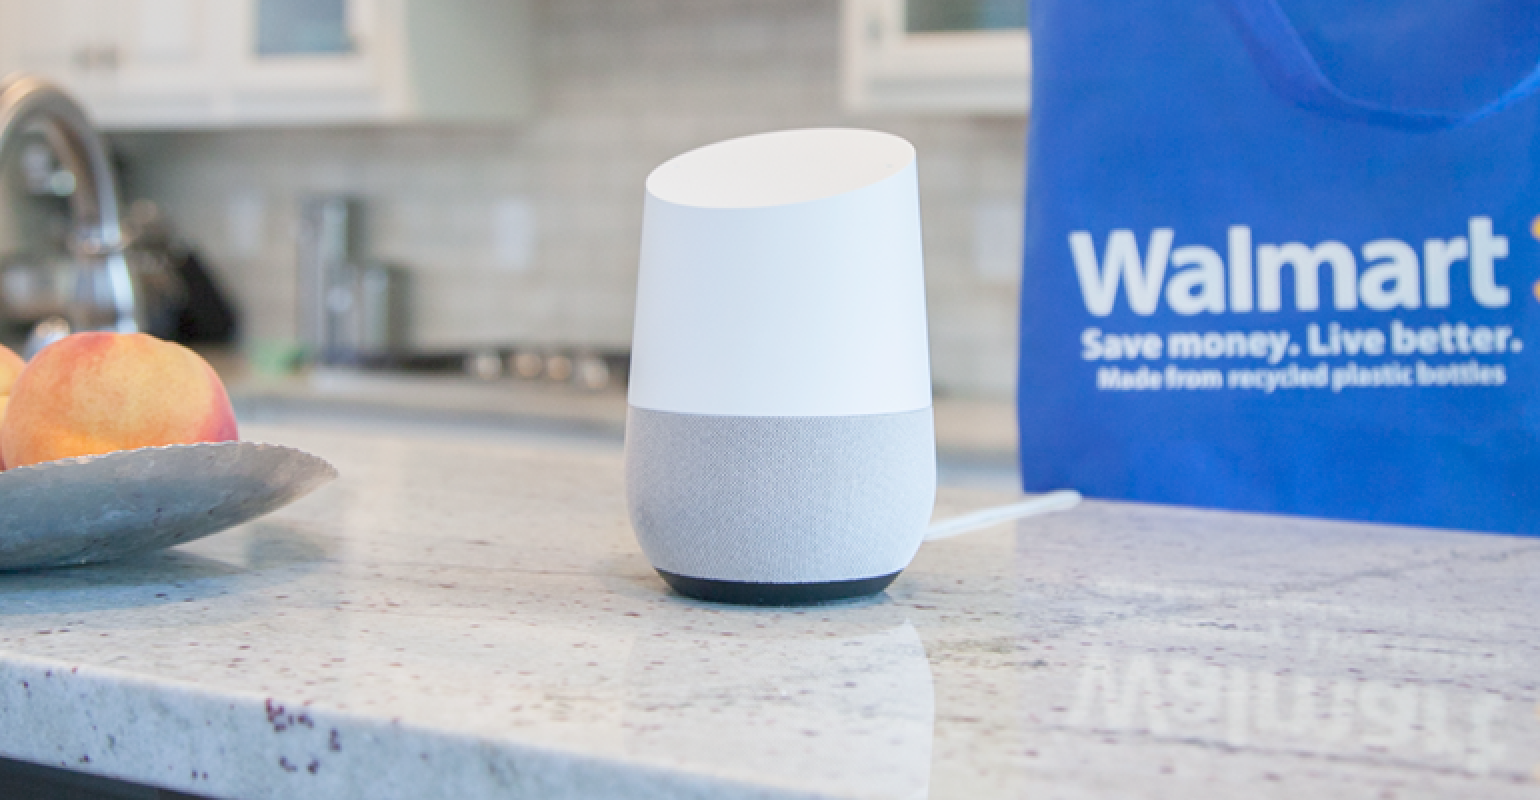 Start shopping with the Google Assistant on Google Home